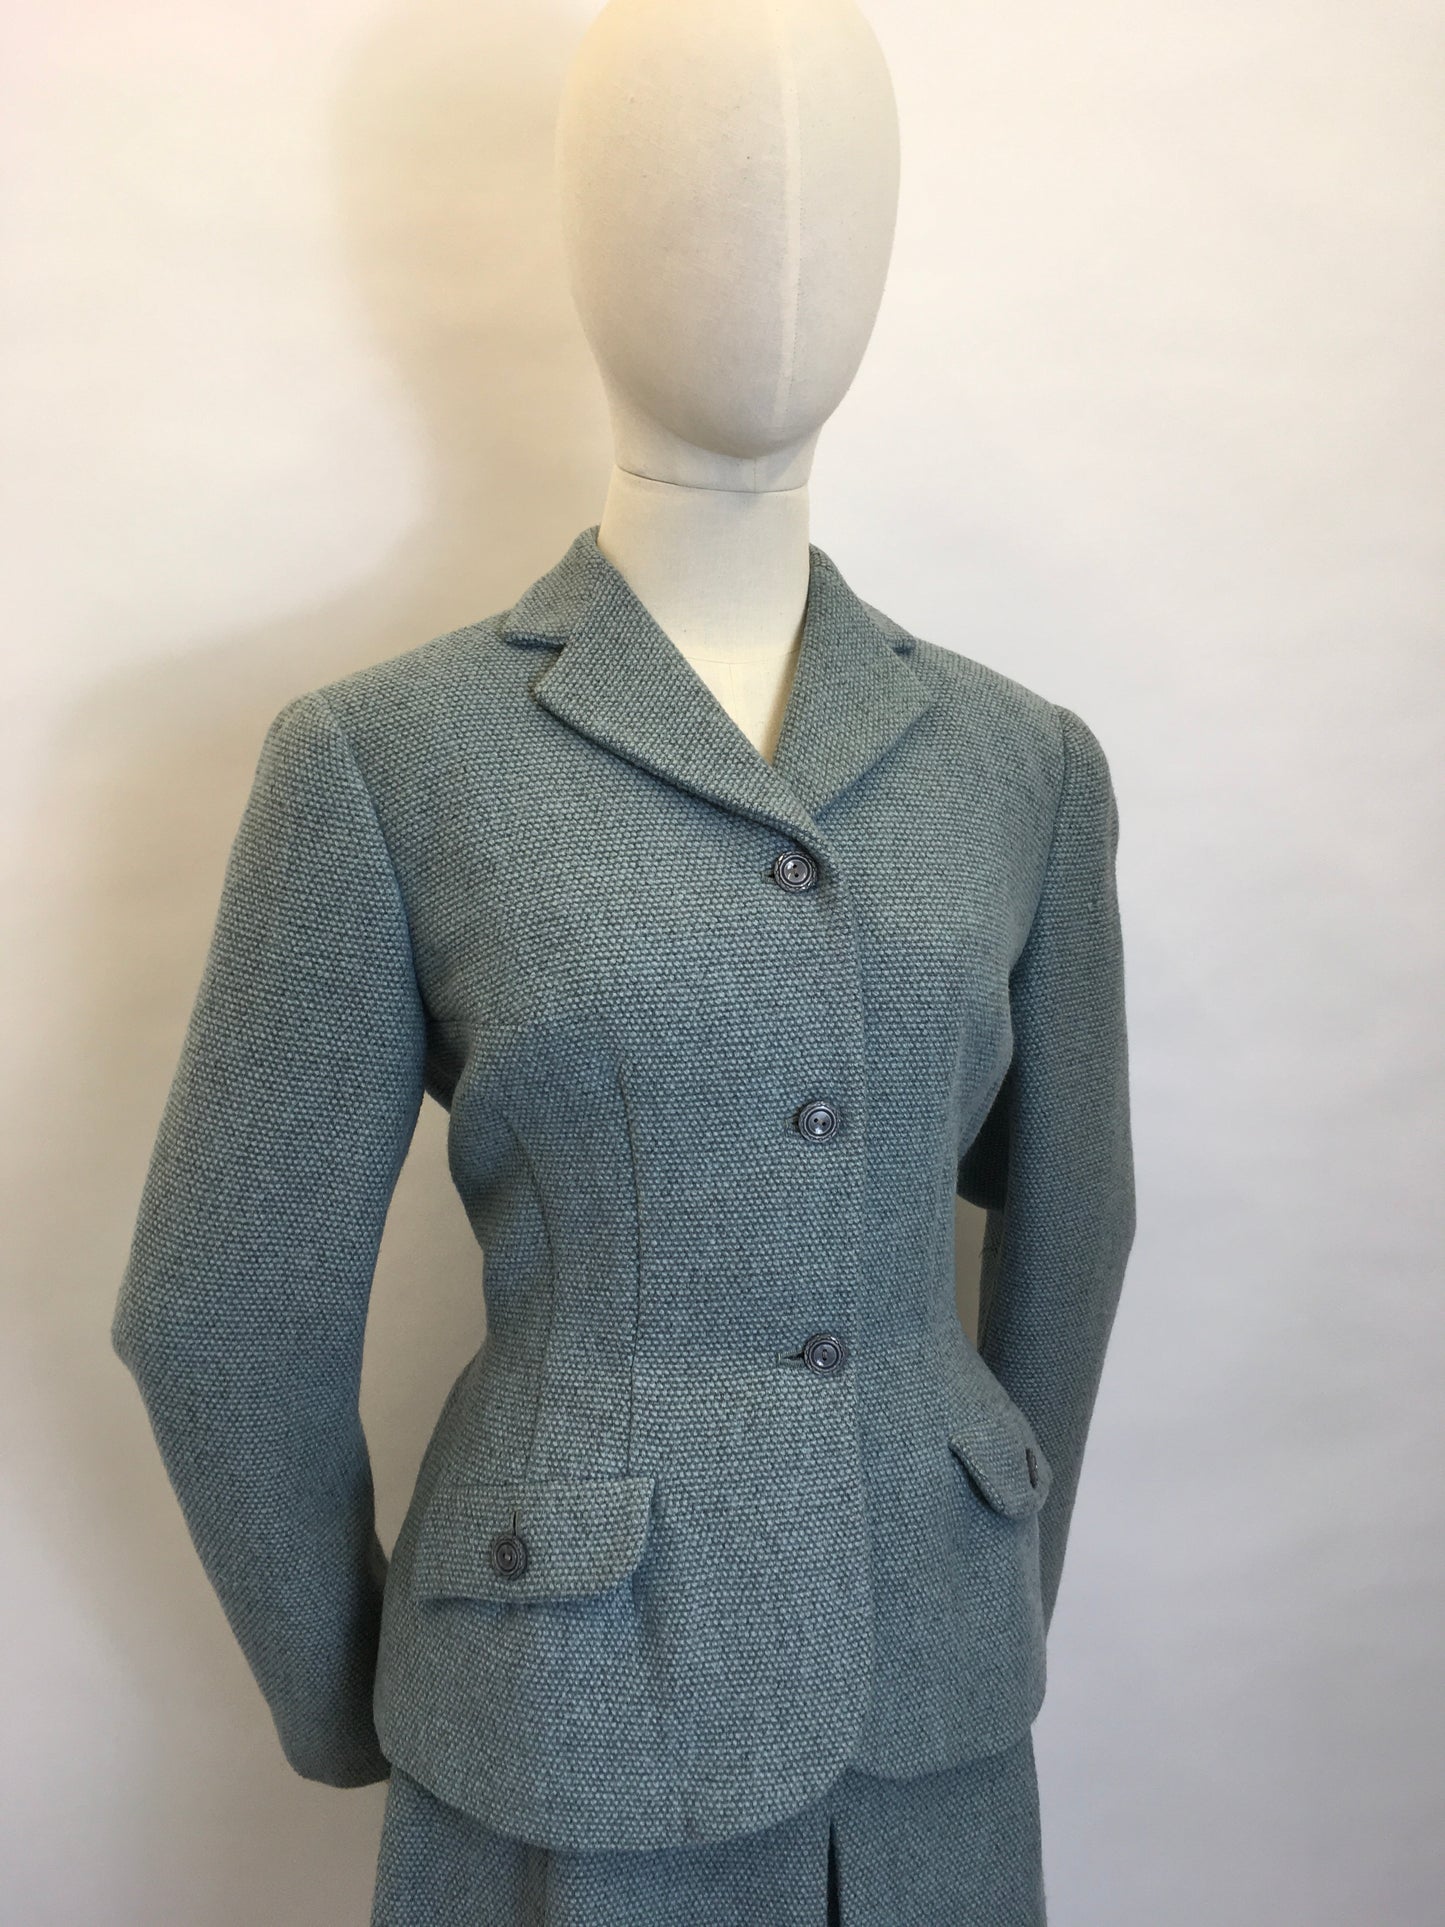 Original 1940’s ‘ Hebe Sports Suit’ - In a Timeless & Classic Powder Blue